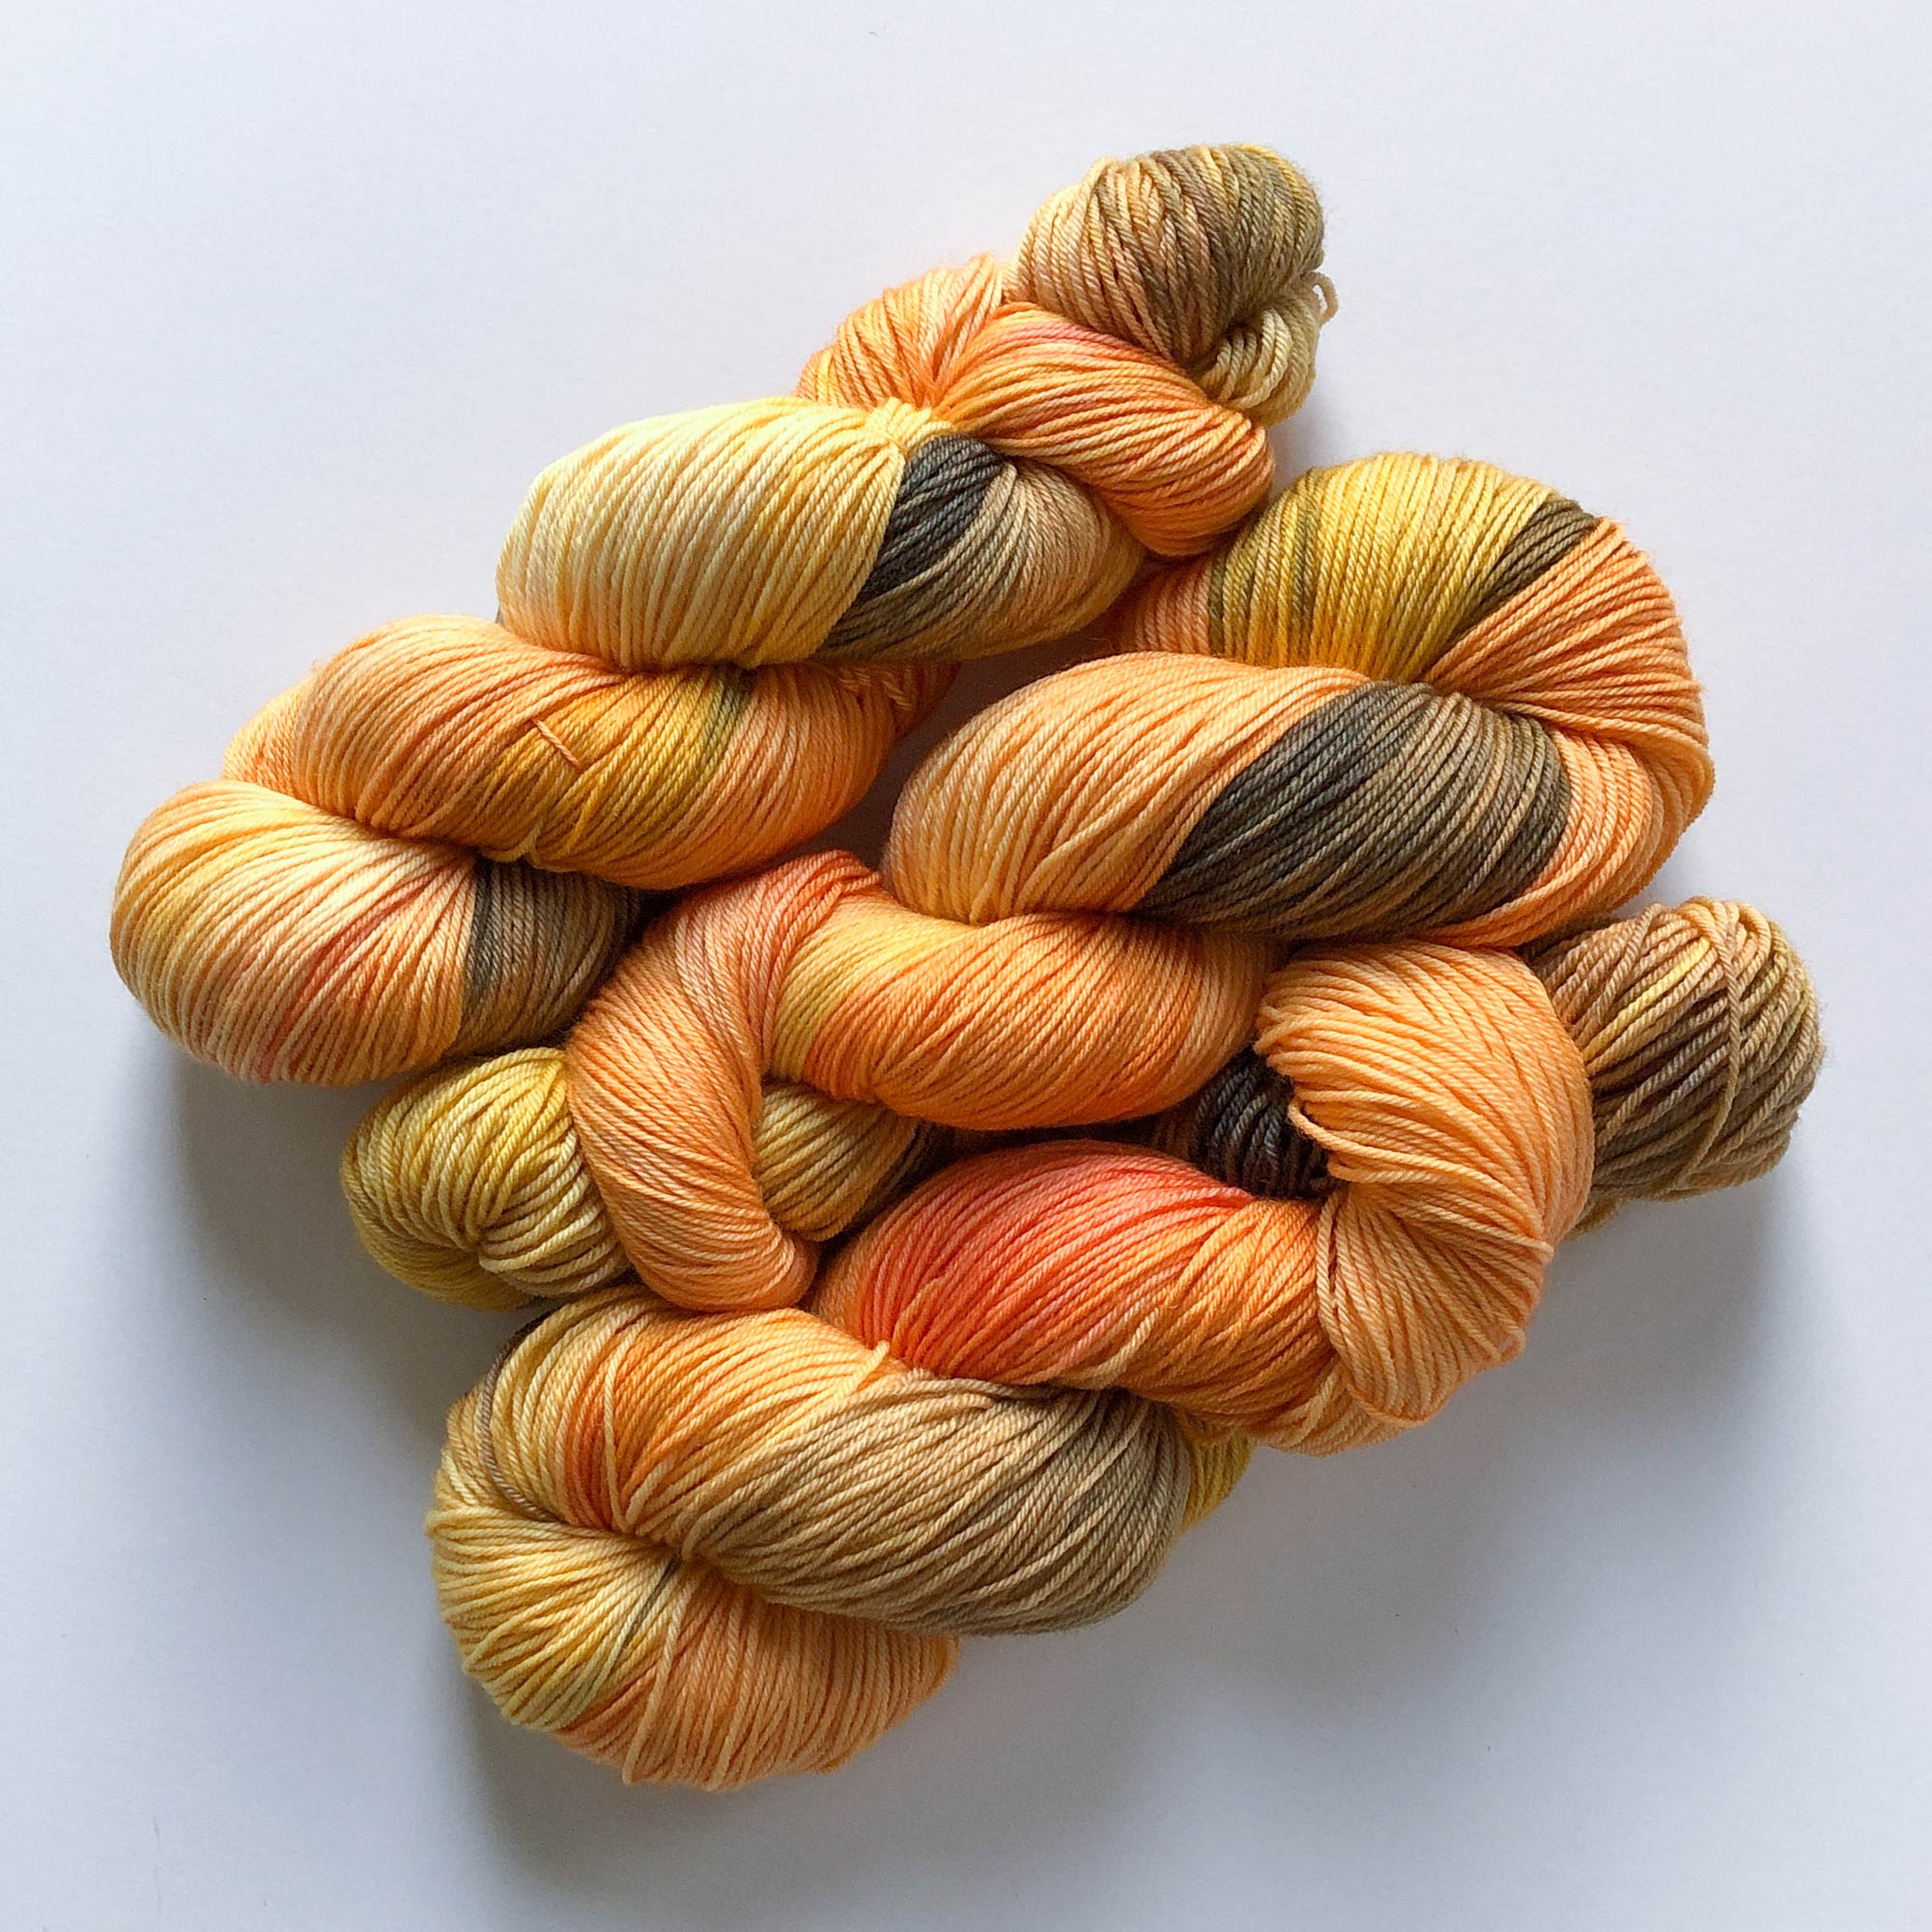 fall and autumn sock yarn - mix of orange, yellow and brown variegated fingering-weight extrafine merino wool yarn 